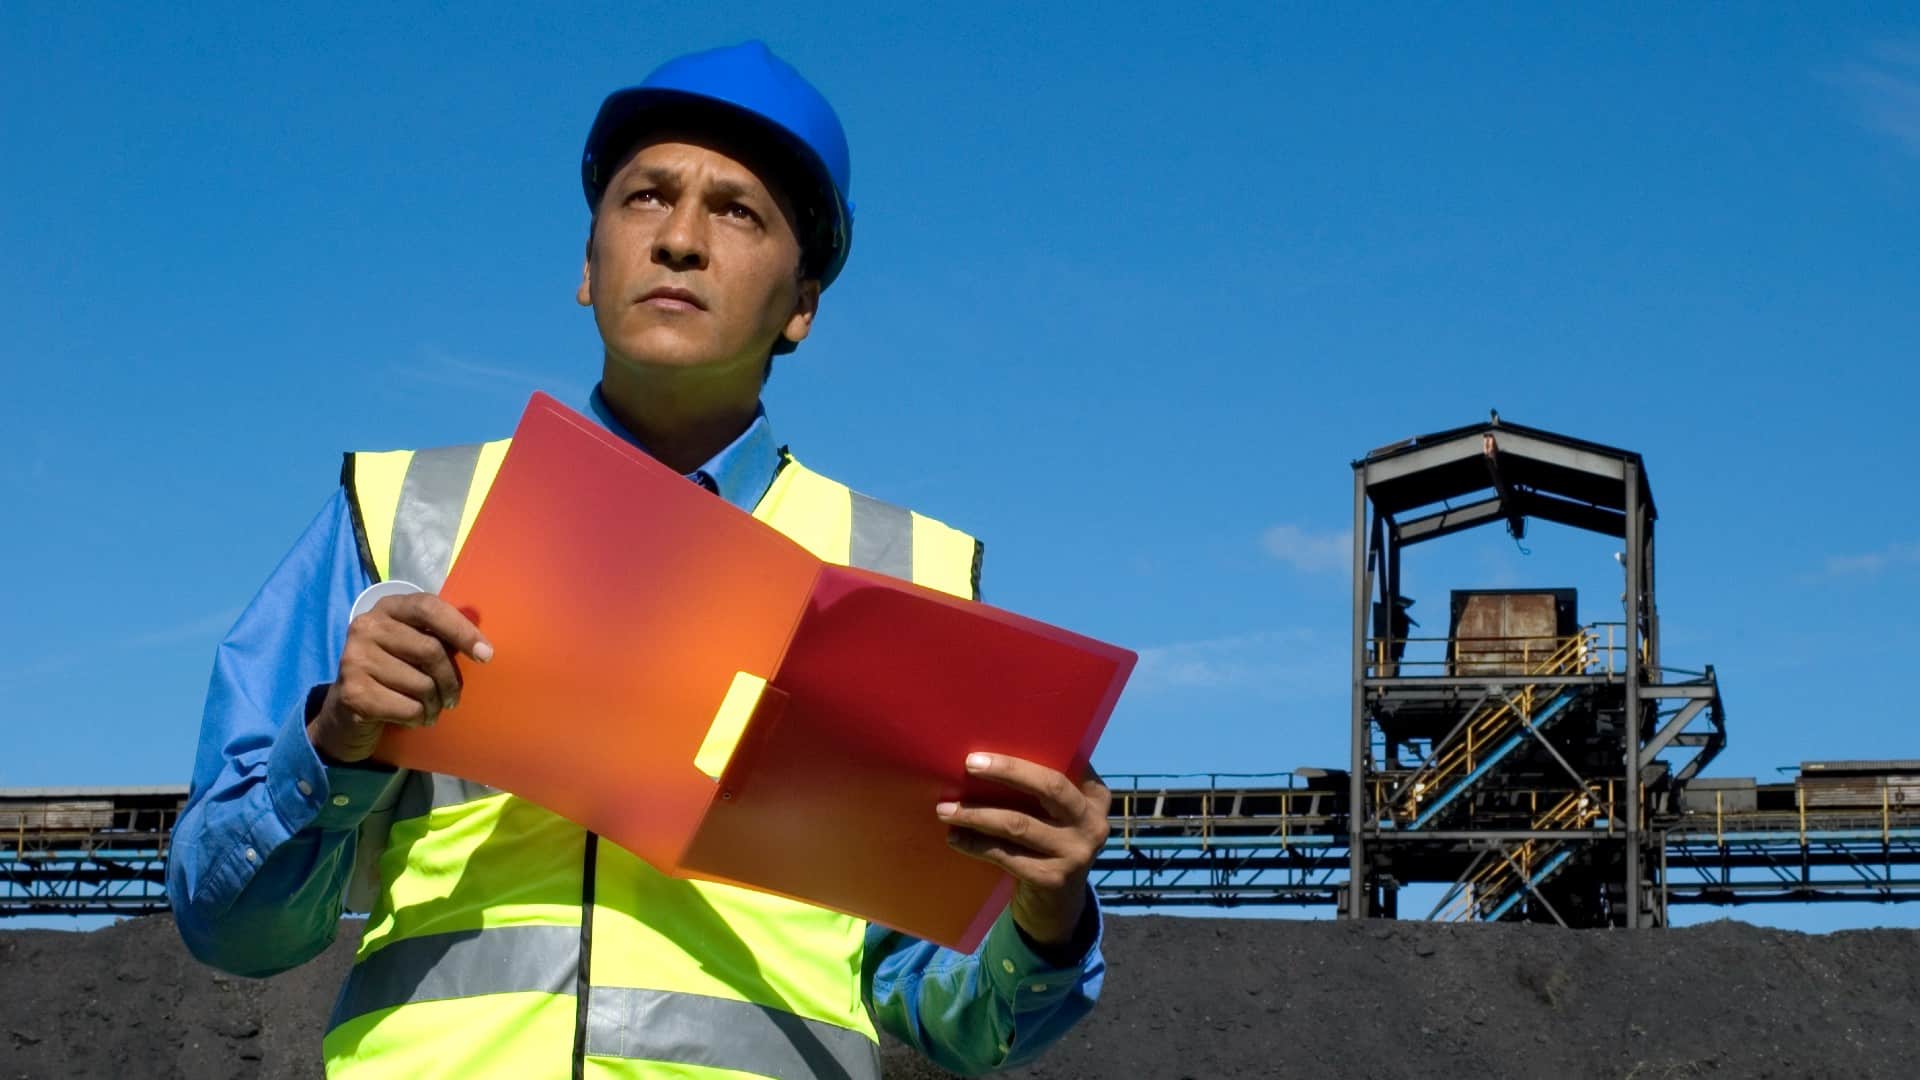 Australian Strategic Materials employee wearing a hard hat at a mine looks into the distance as he checks a folder.